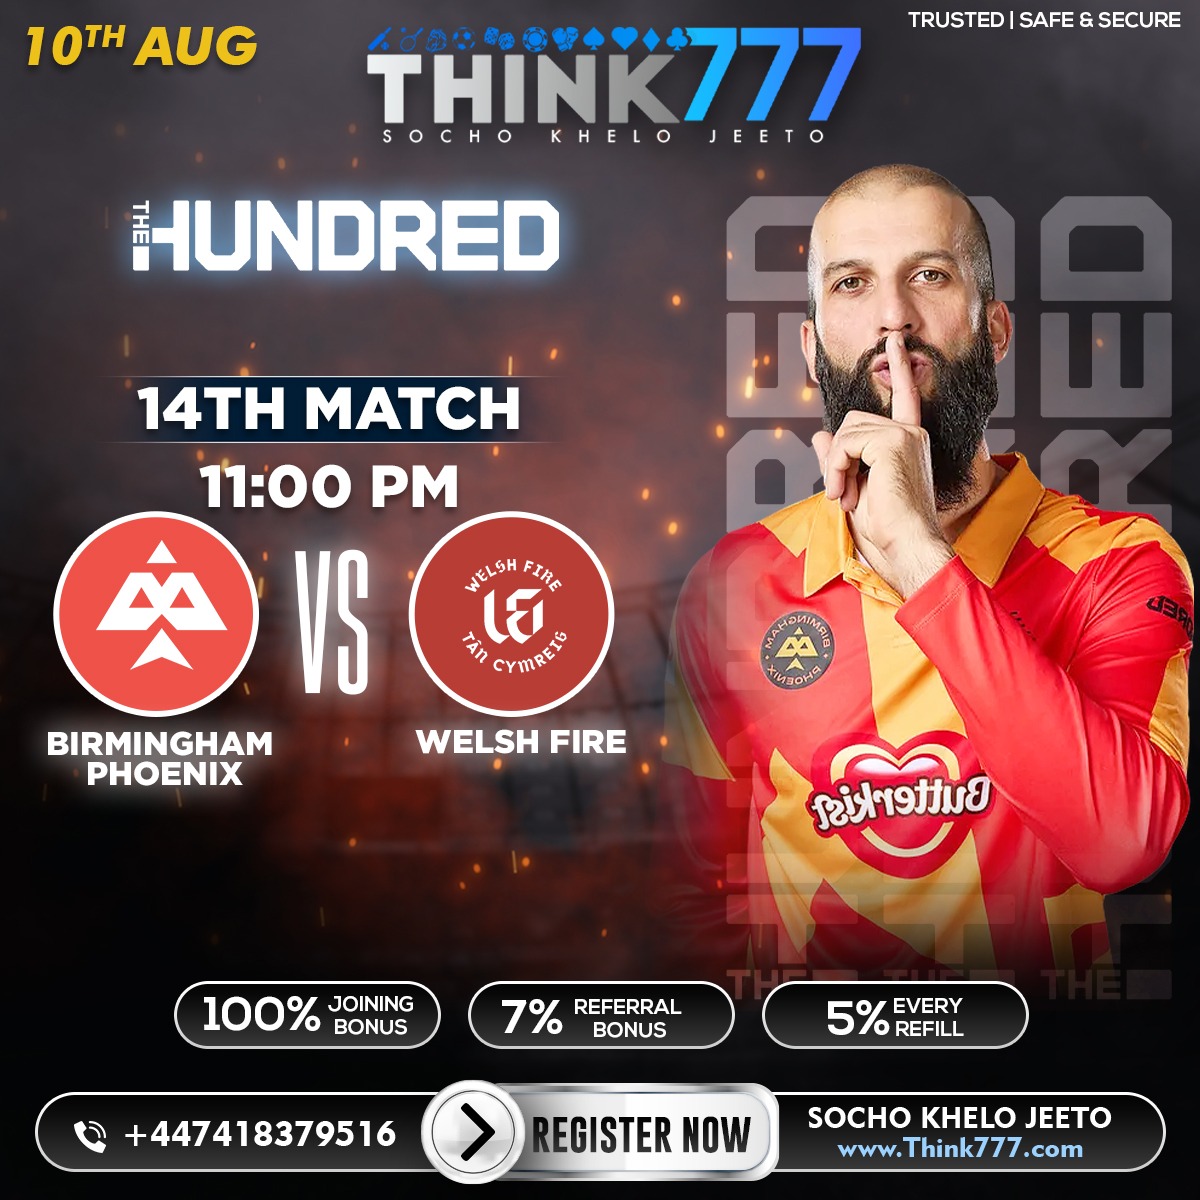 Three world-class players go head-to-head in #TheHundred today! 🇵🇰

Who will come out on top? 🔝
.
.
.
.
.
.
#lpl2023 #think777 #think777 #goacasino
#lucky7 #teenpatti #diamondexch #skyexchange #andarbahar #casinometer #lottery #dragontiger #amarakbaranthony
#roulette #poker